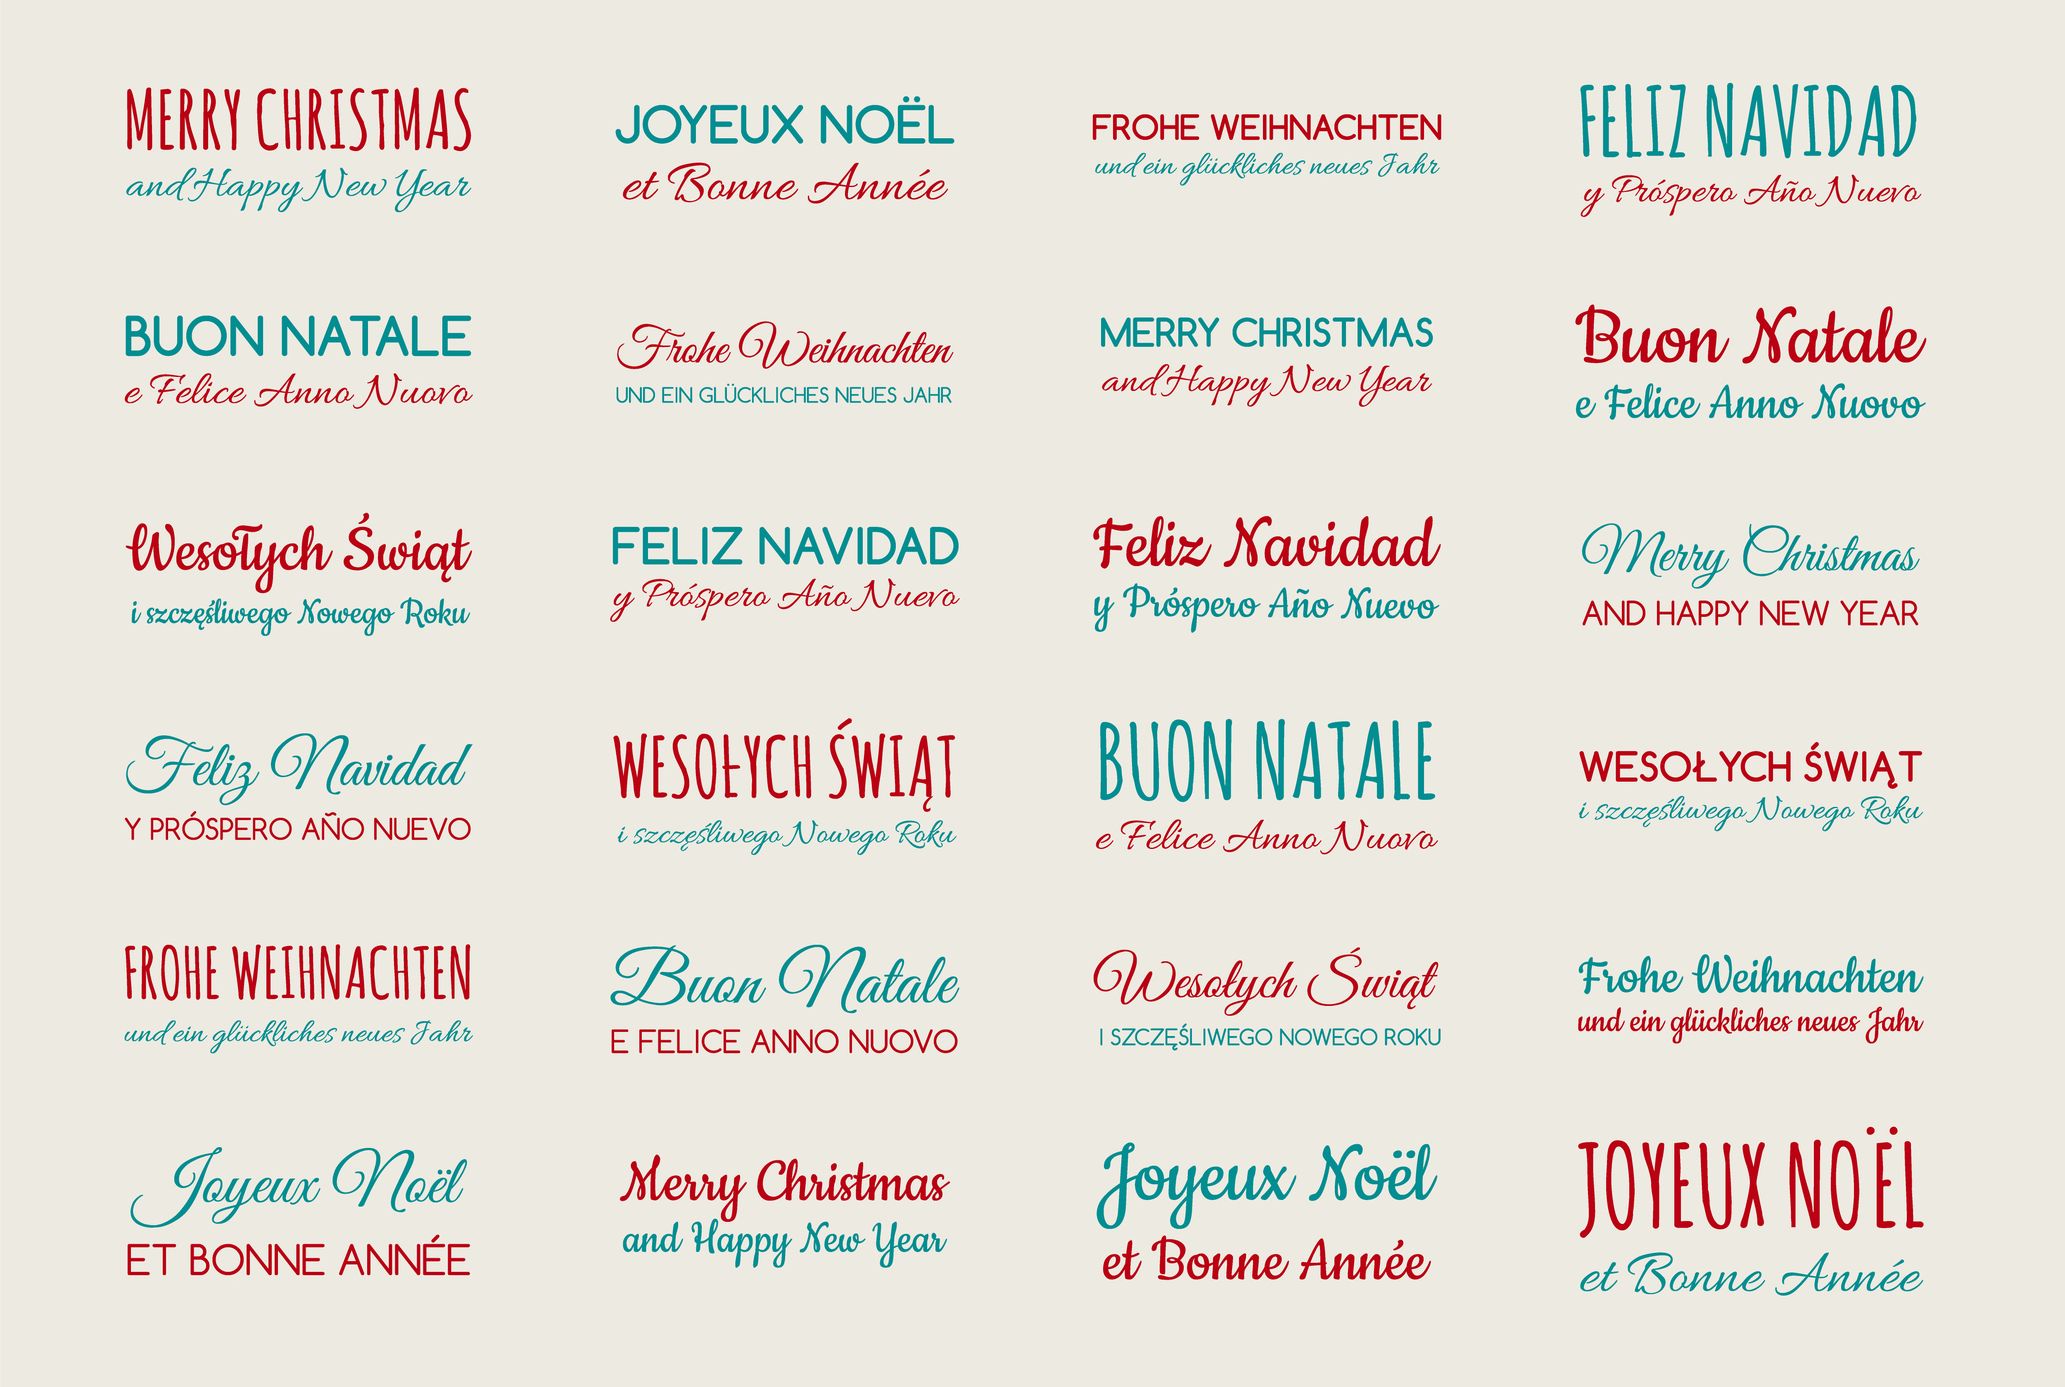 Buon Natale What Does It Mean.How To Say Merry Christmas In 26 Different Languages Mental Floss